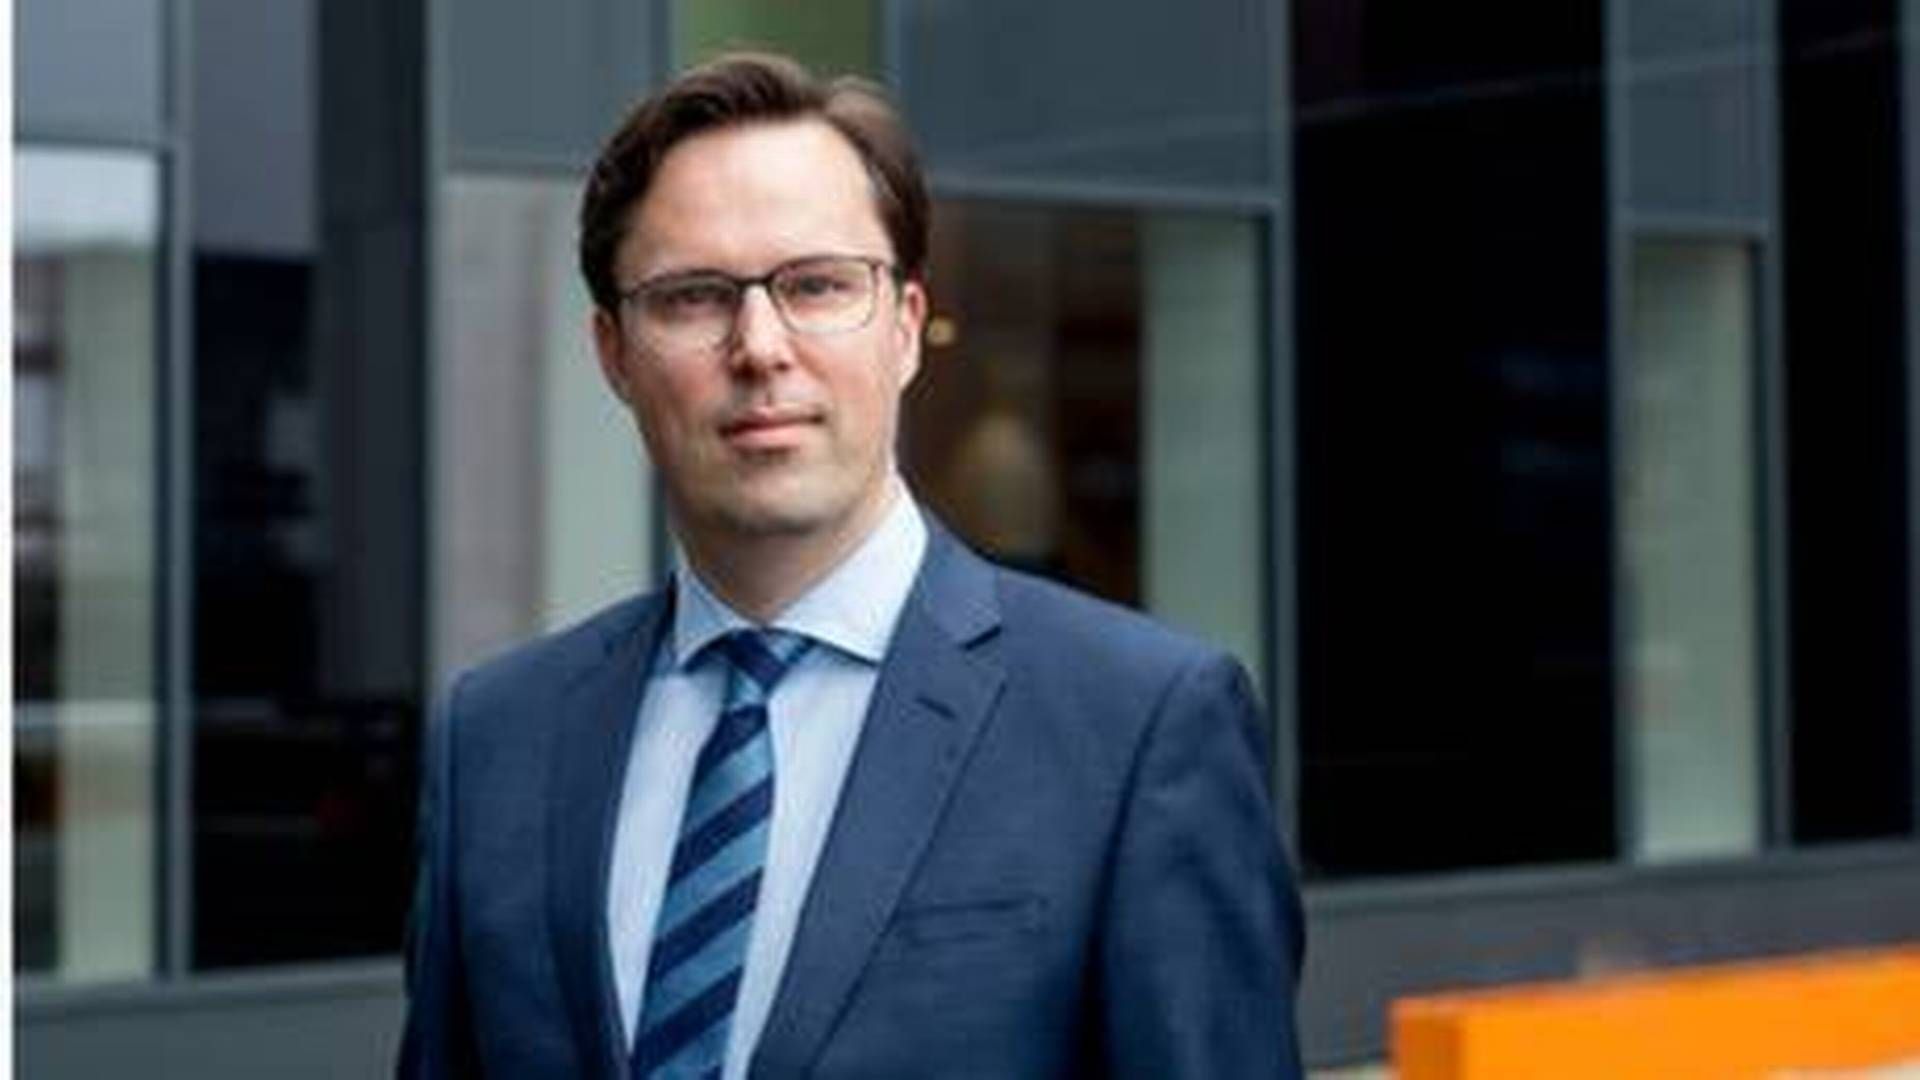 Mikkel Svenstrup started as CIO at ATP at the beginning of March. | Photo: PR/P+